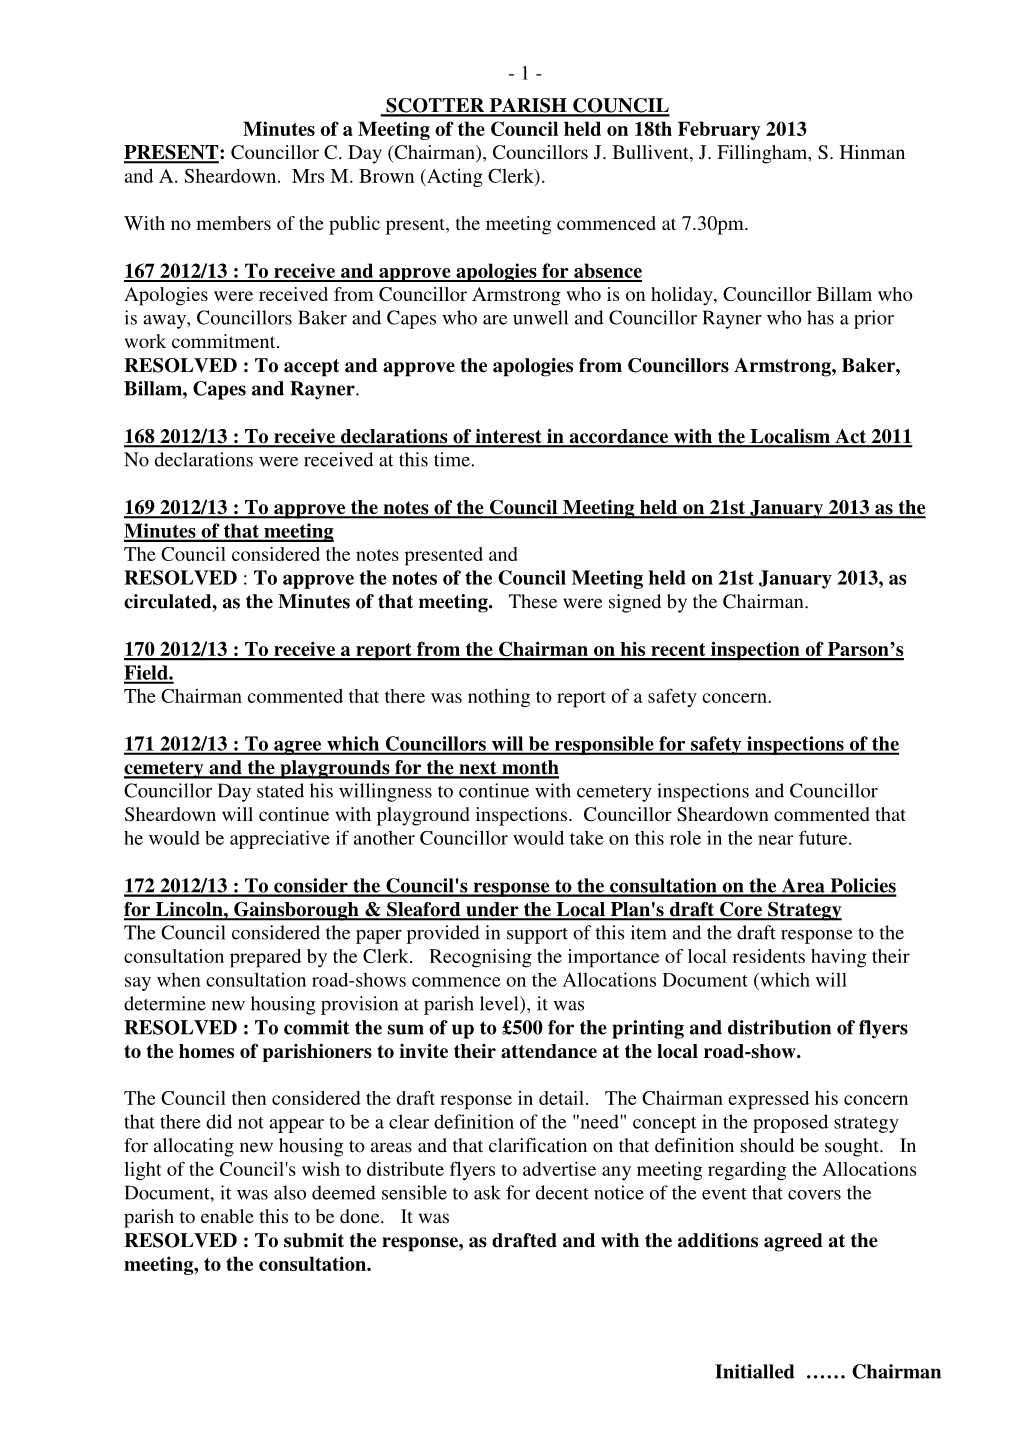 1 - SCOTTER PARISH COUNCIL Minutes of a Meeting of the Council Held on 18Th February 2013 PRESENT : Councillor C